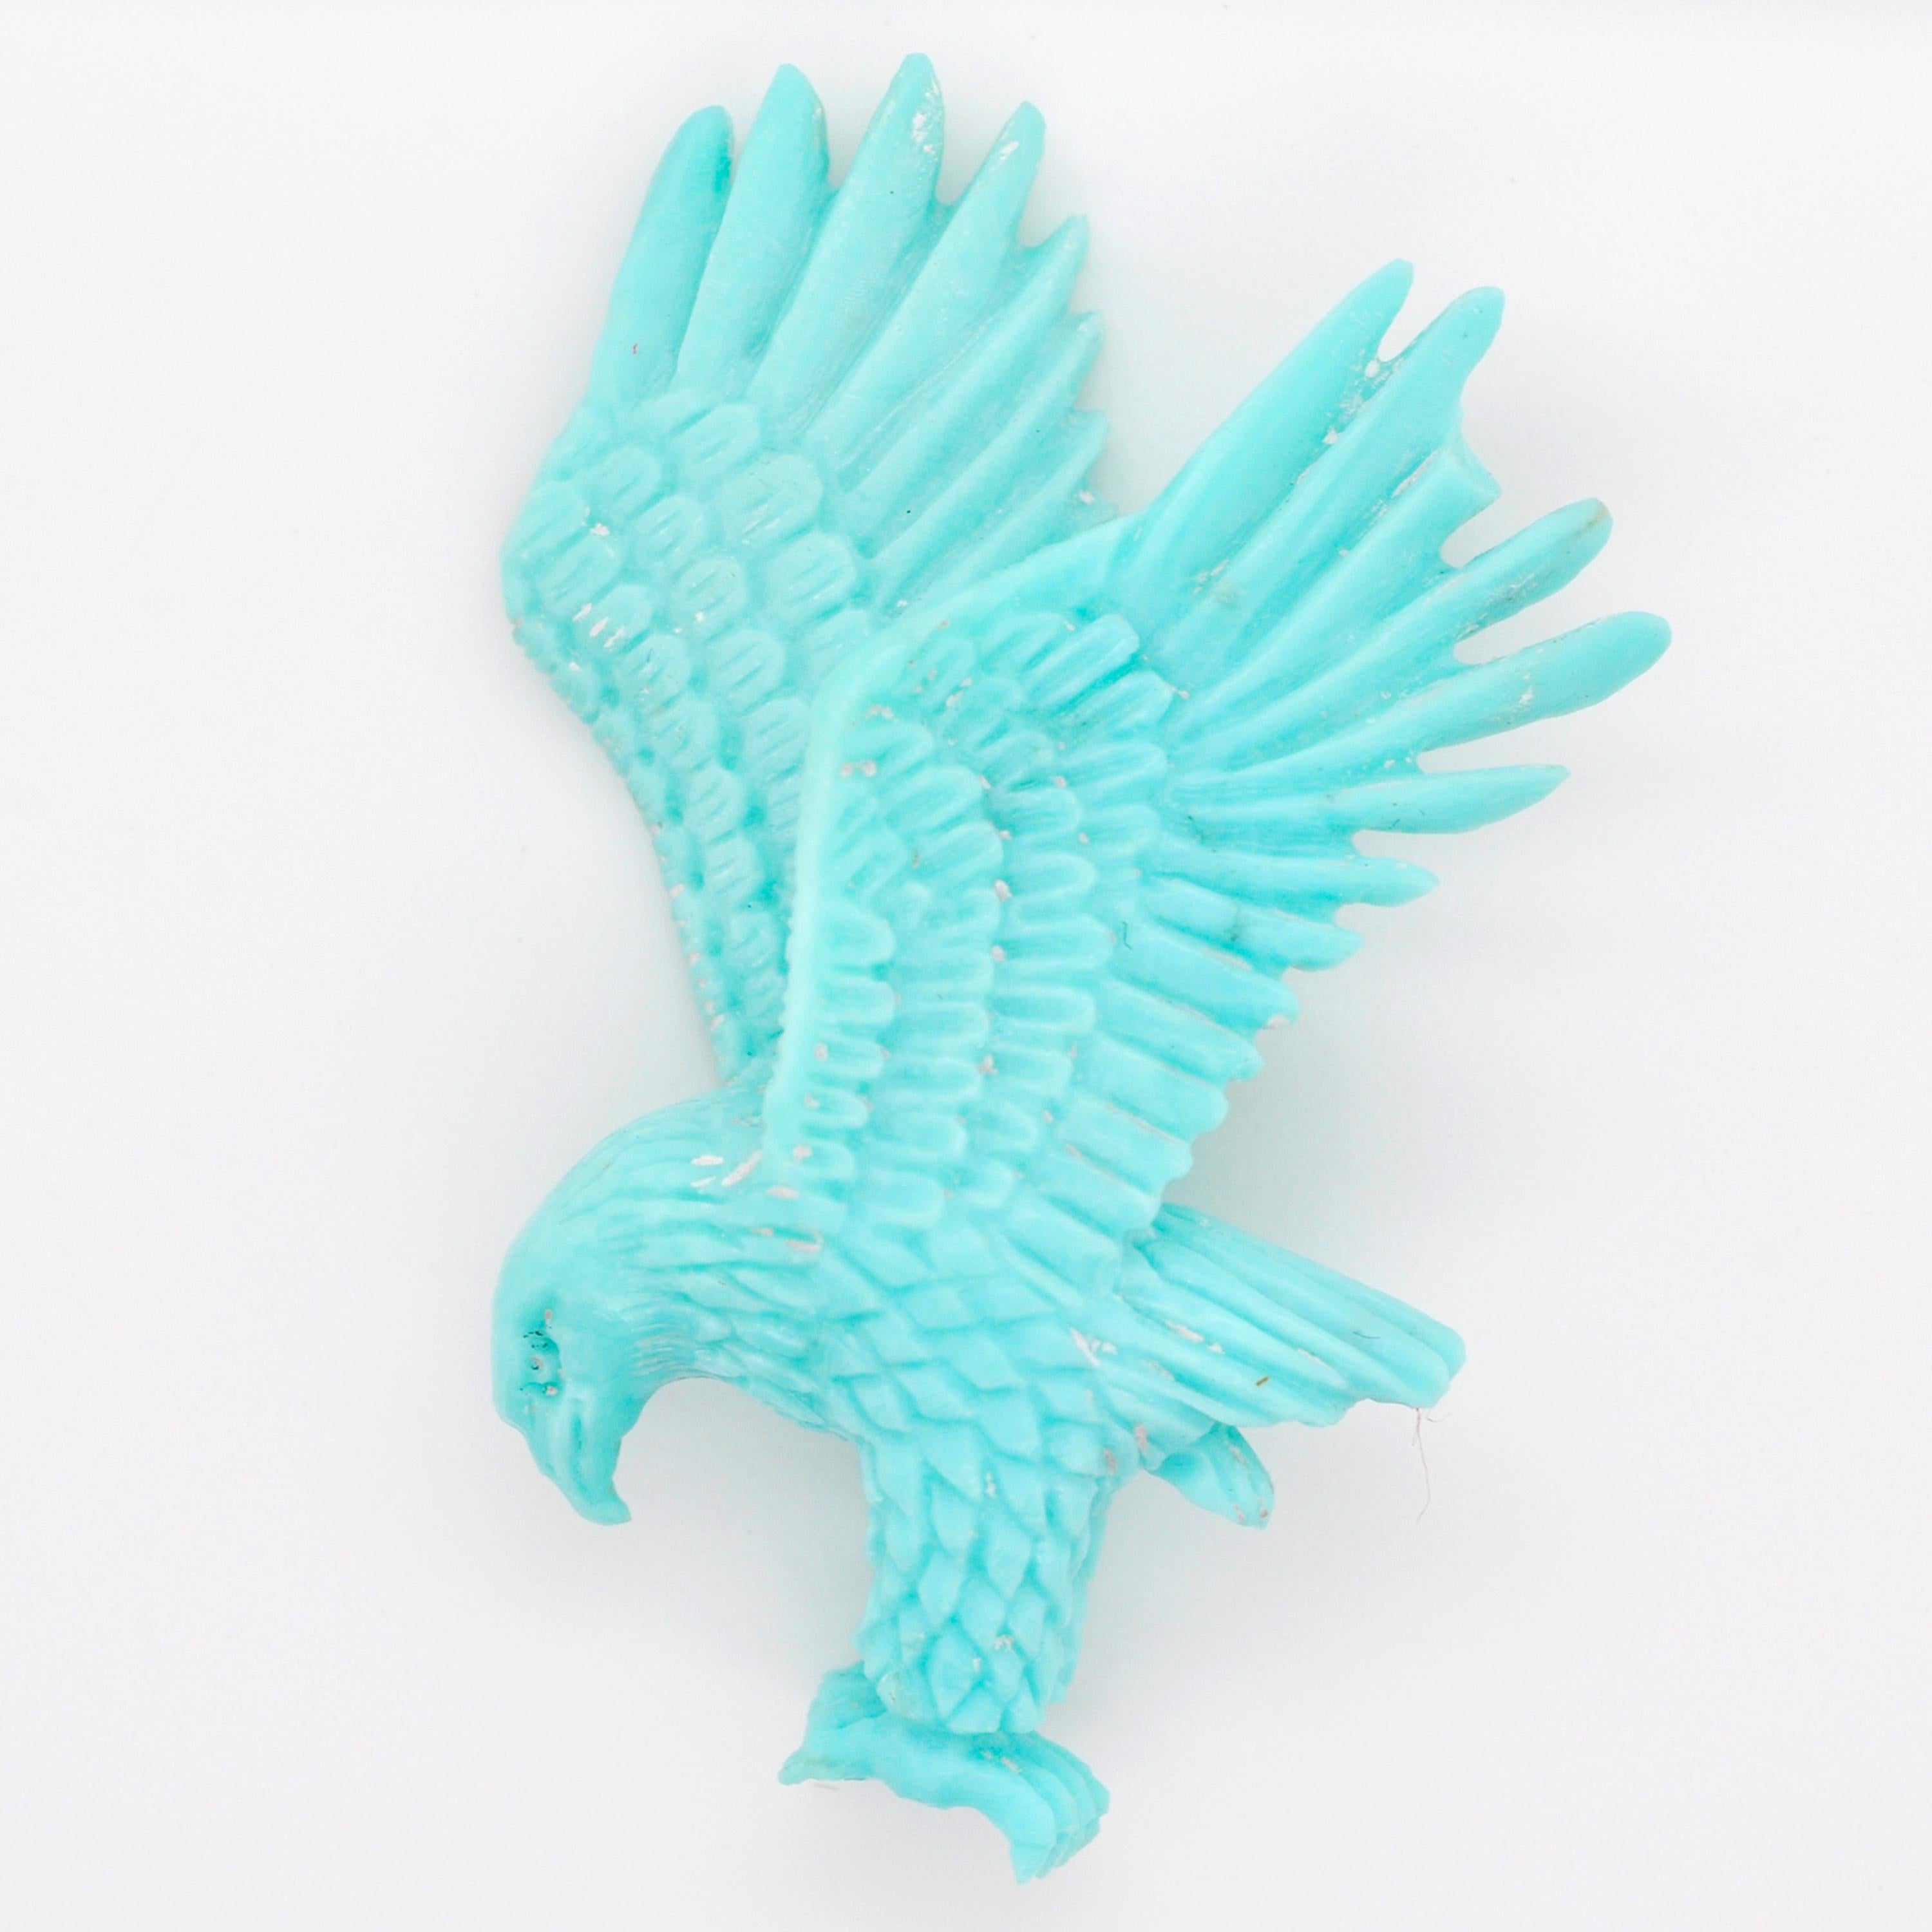 Contemporary Hand Carved 29.14 Carats Natural Arizona Turquoise Eagle Loose Gemstone Pendant For Sale